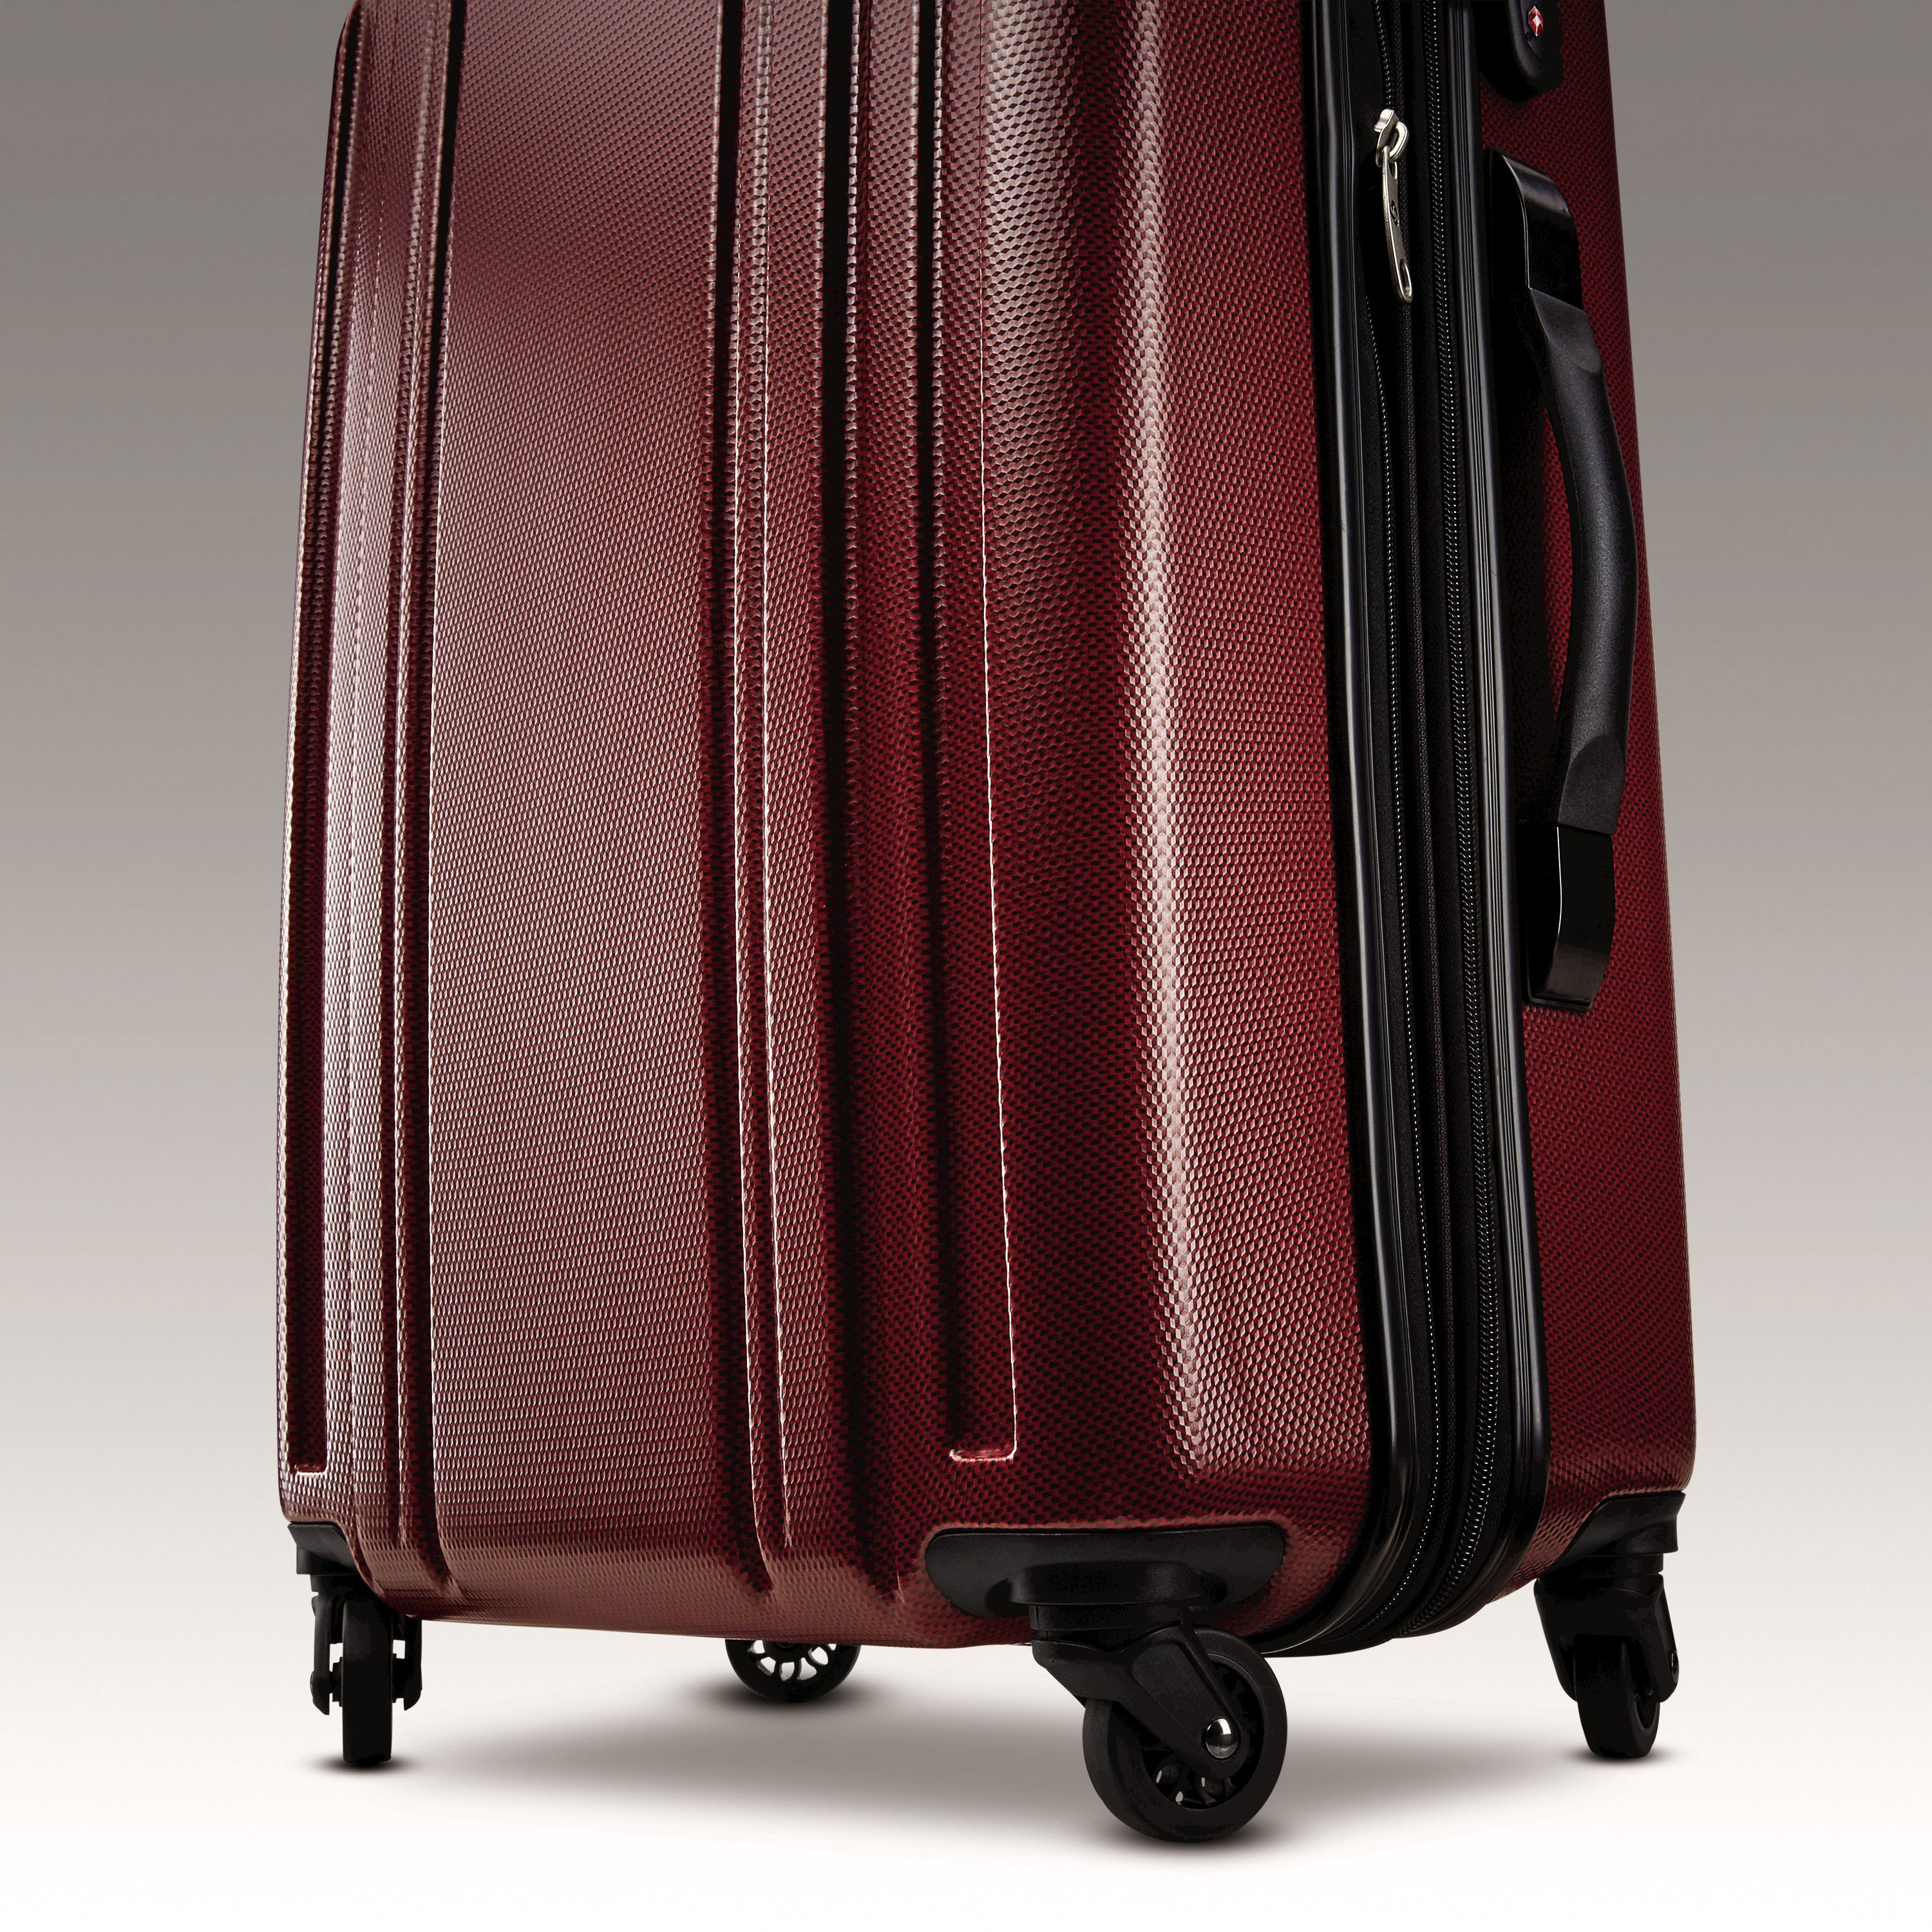 Samsonite Carbon 2 Carry-On Spinner - Luggage